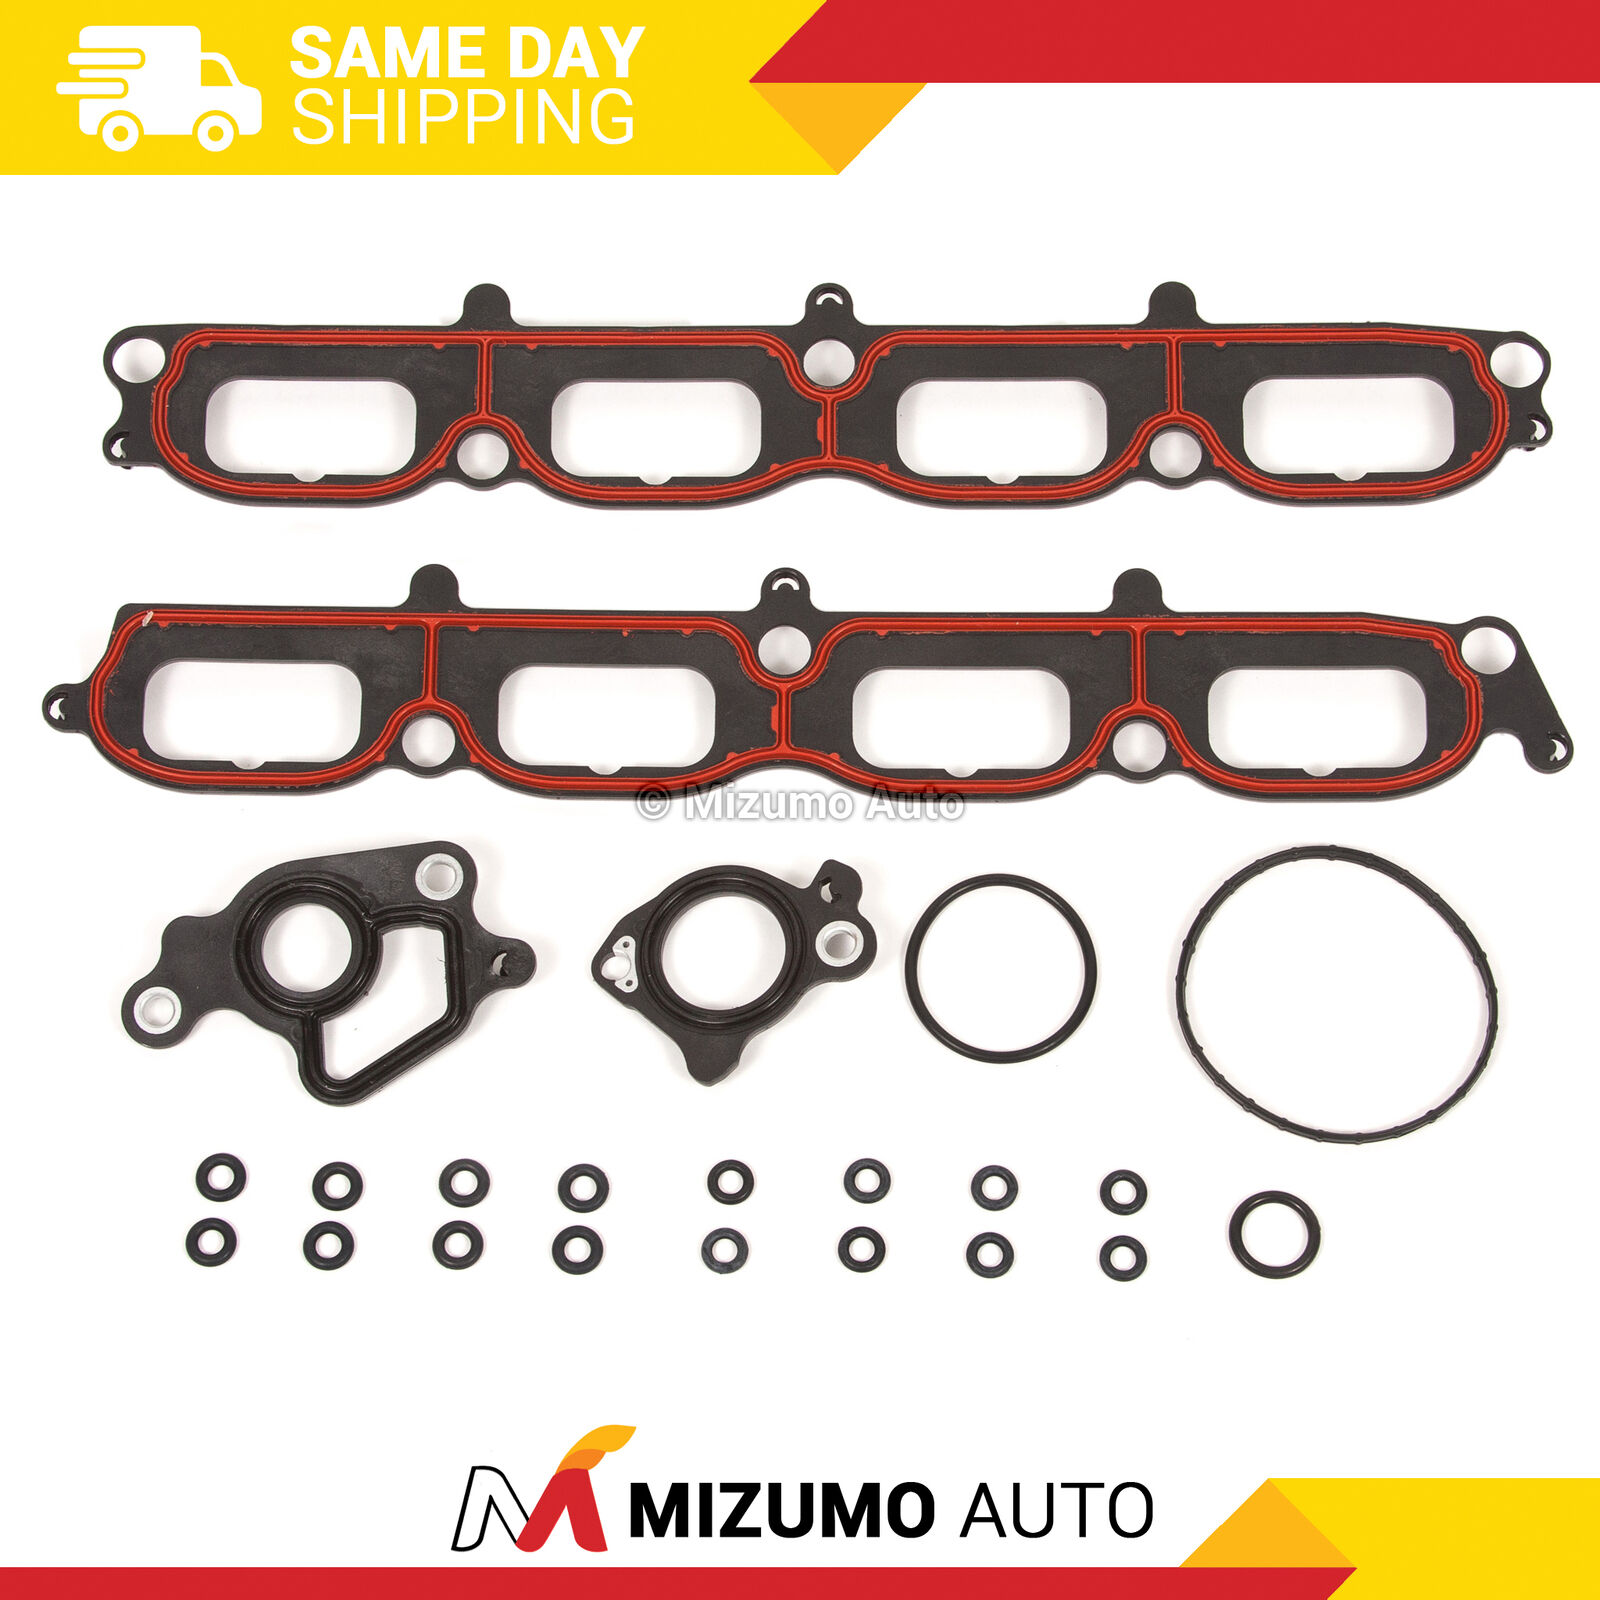 Intake Manifold Gasket For Ford Expedition F-Series Lincoln 5.4 24 Valve TRITON